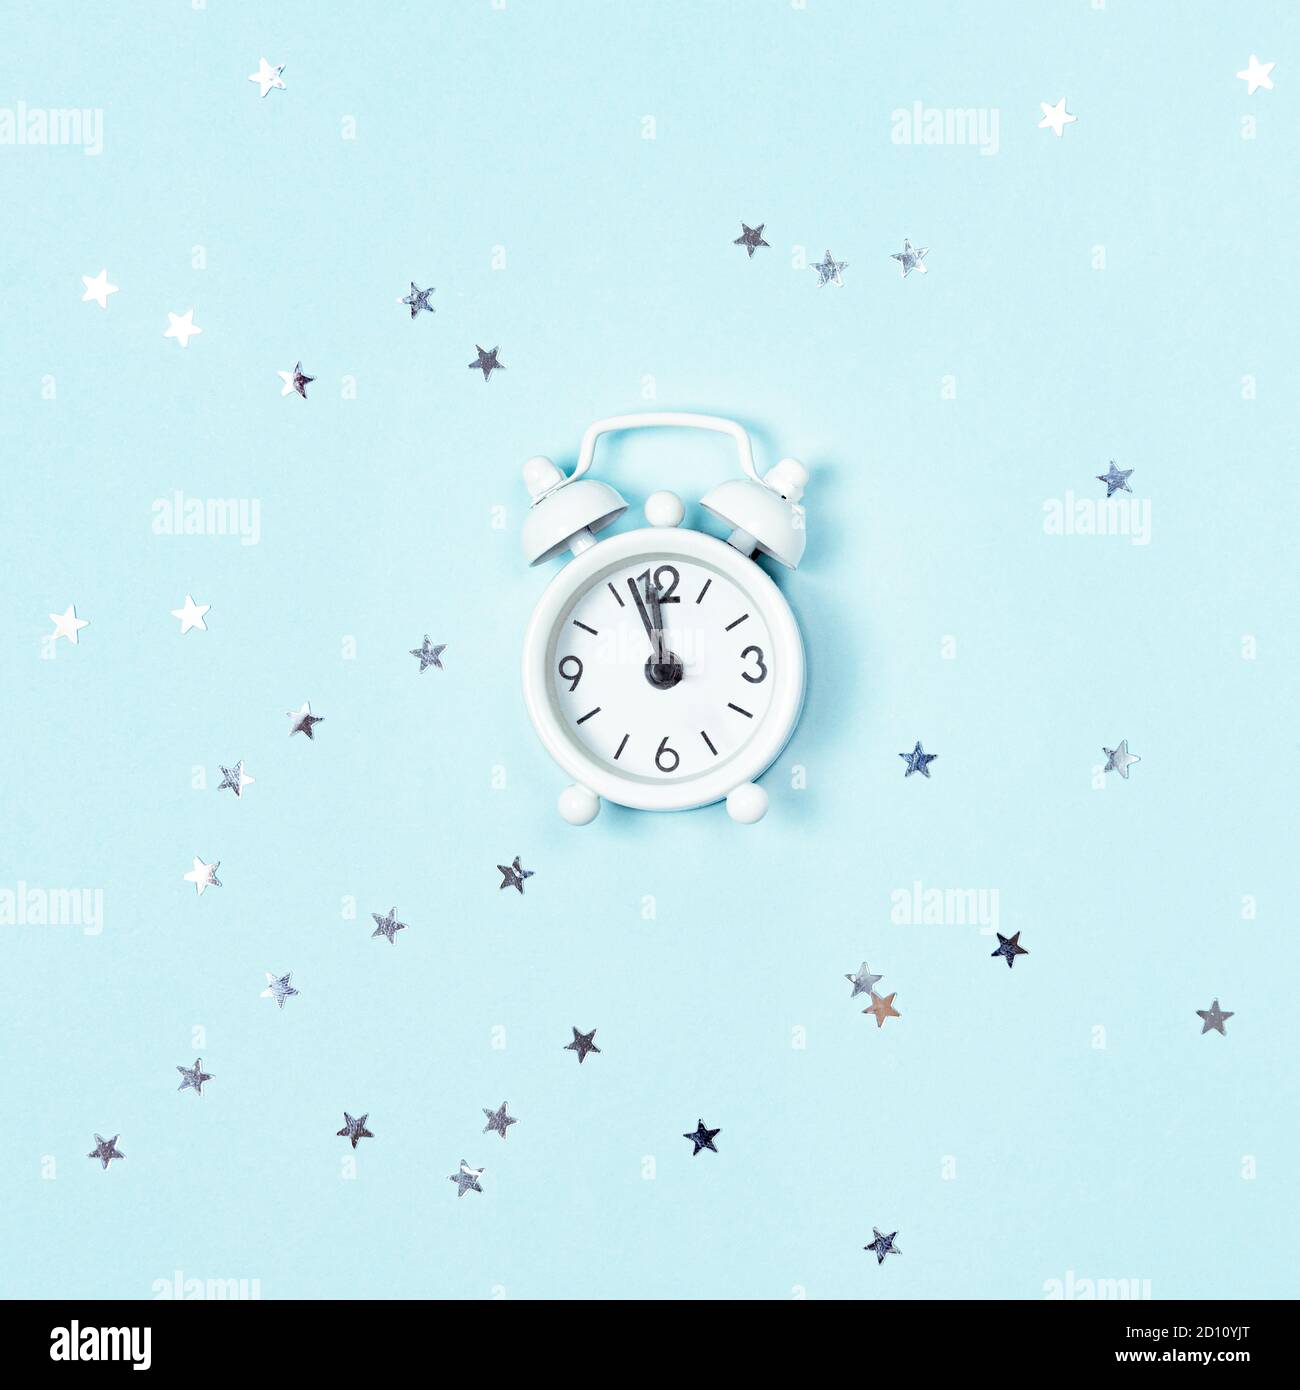 White vintage style alarm clock showing five minutes left untill midnight over blue background with silver stars sequins. New Year advent. Stock Photo